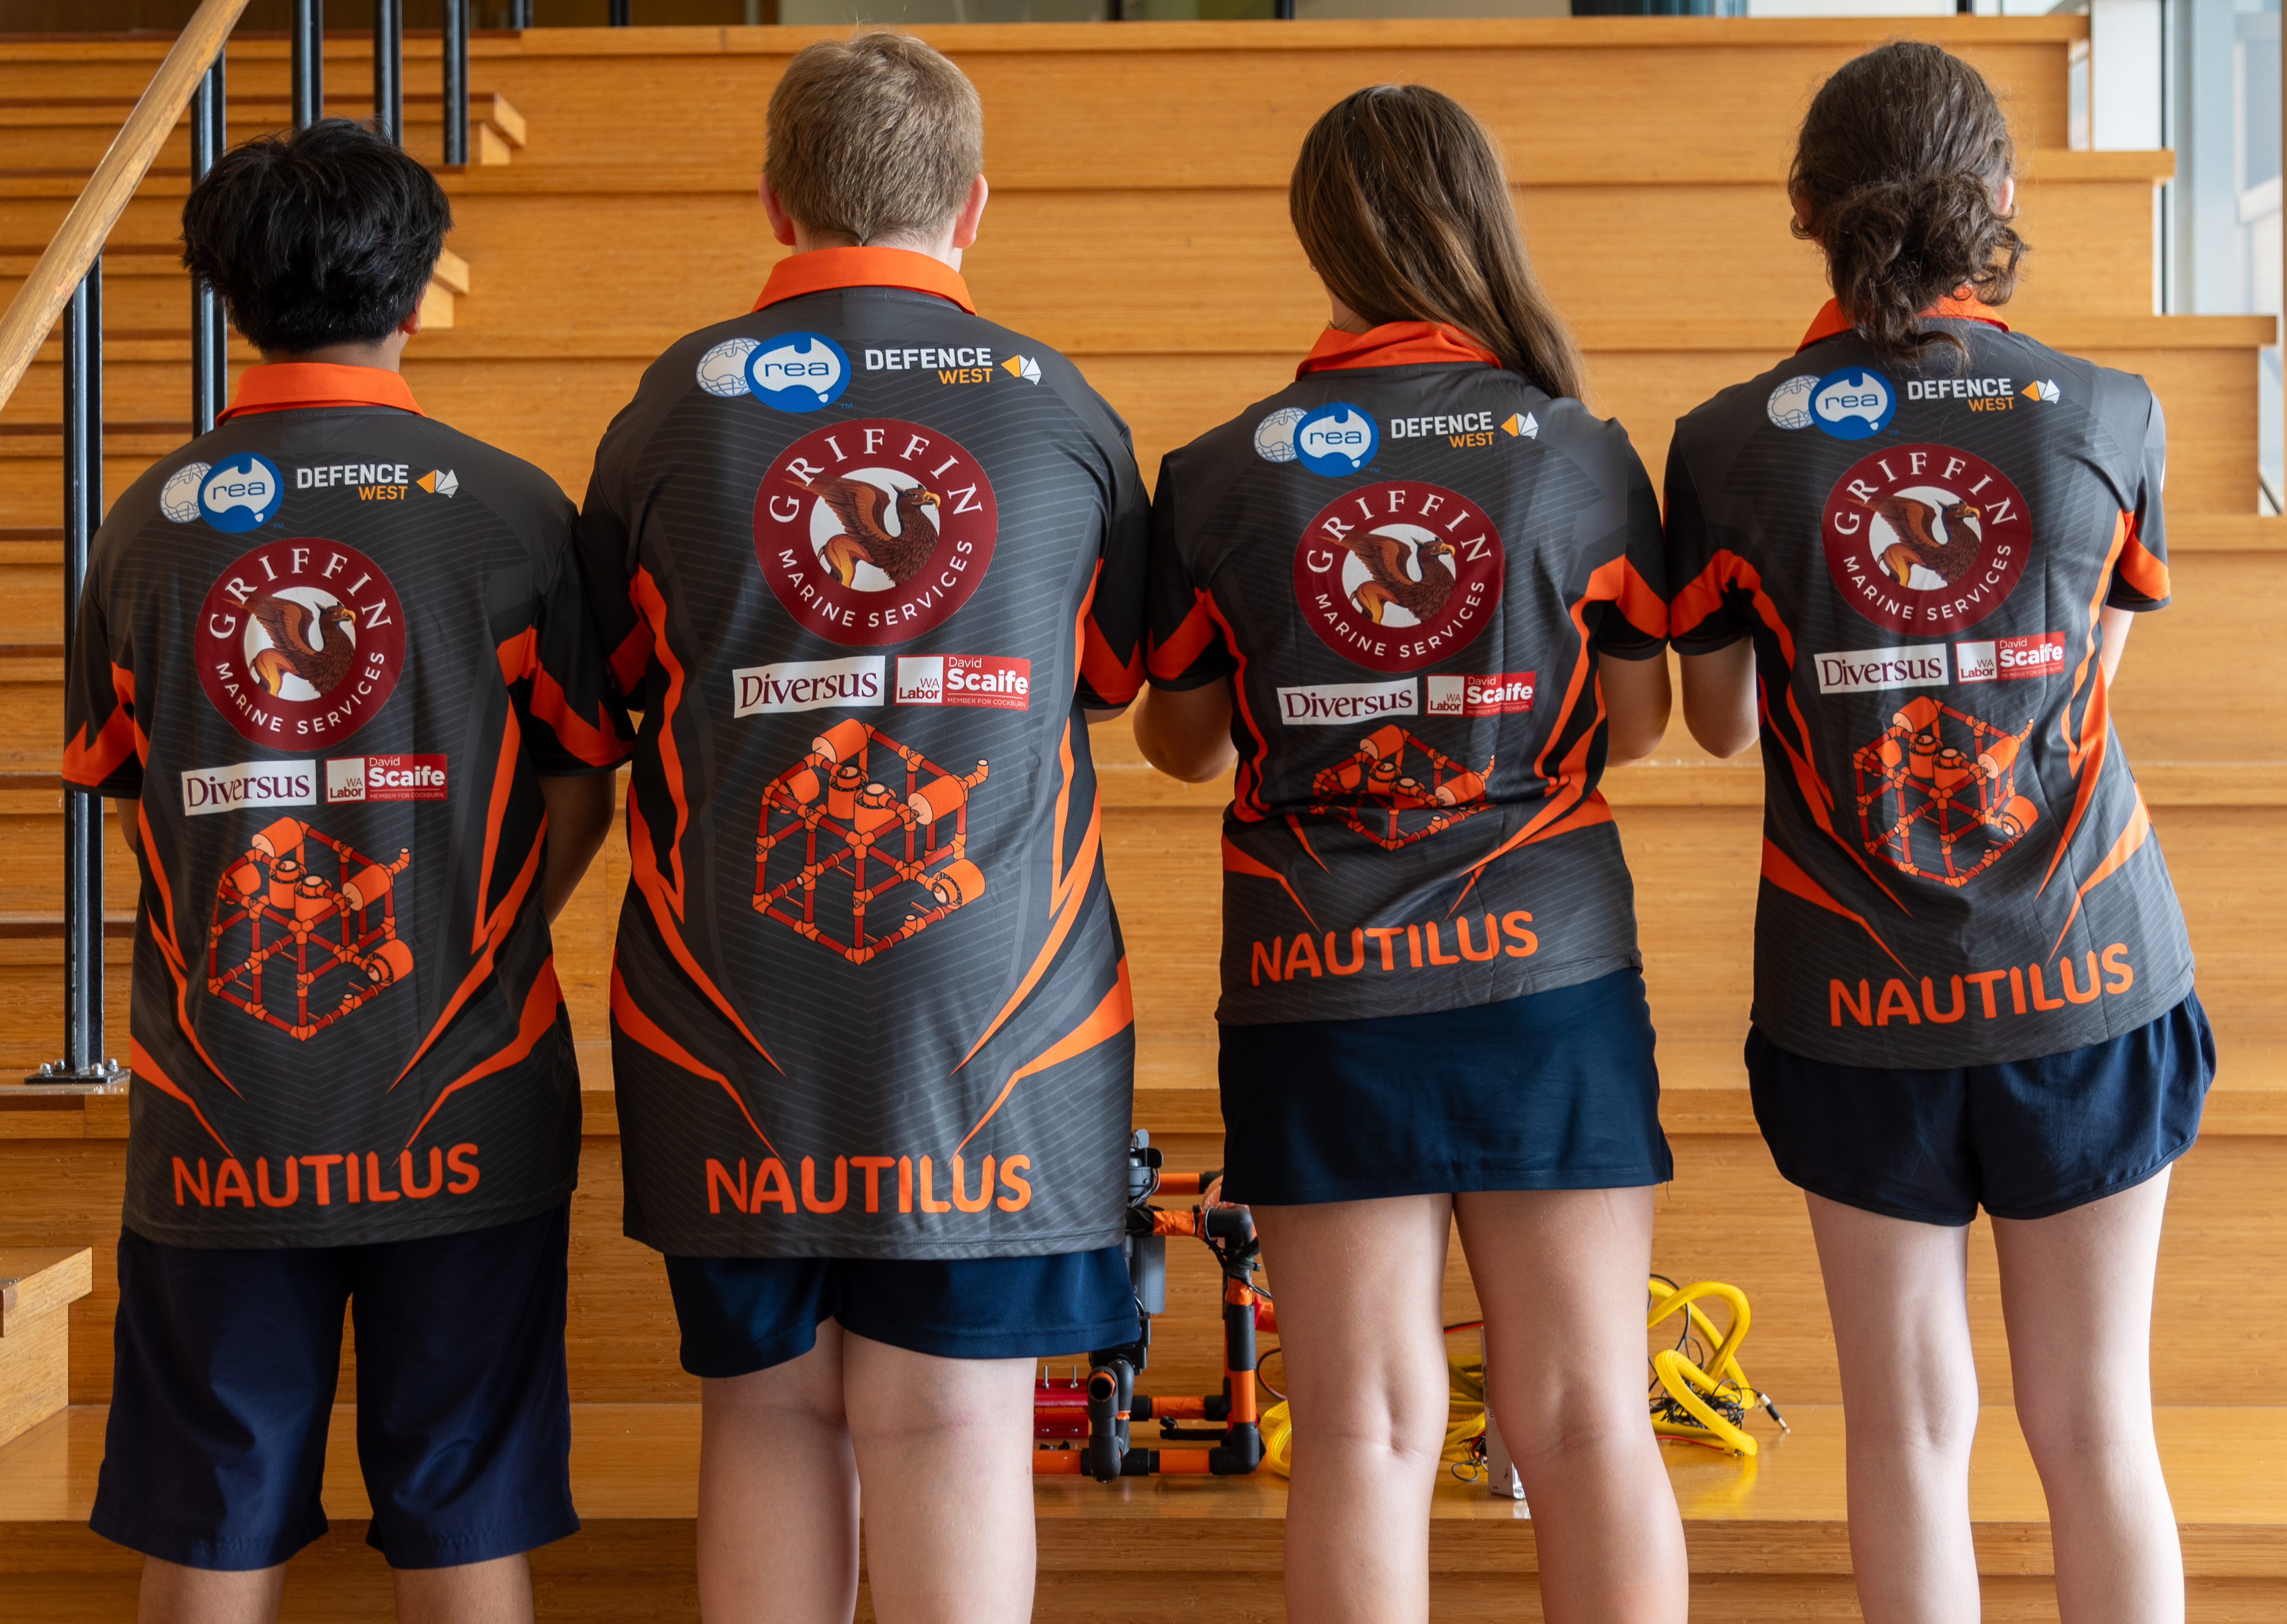 Nautilus students showing of the back of their uniform